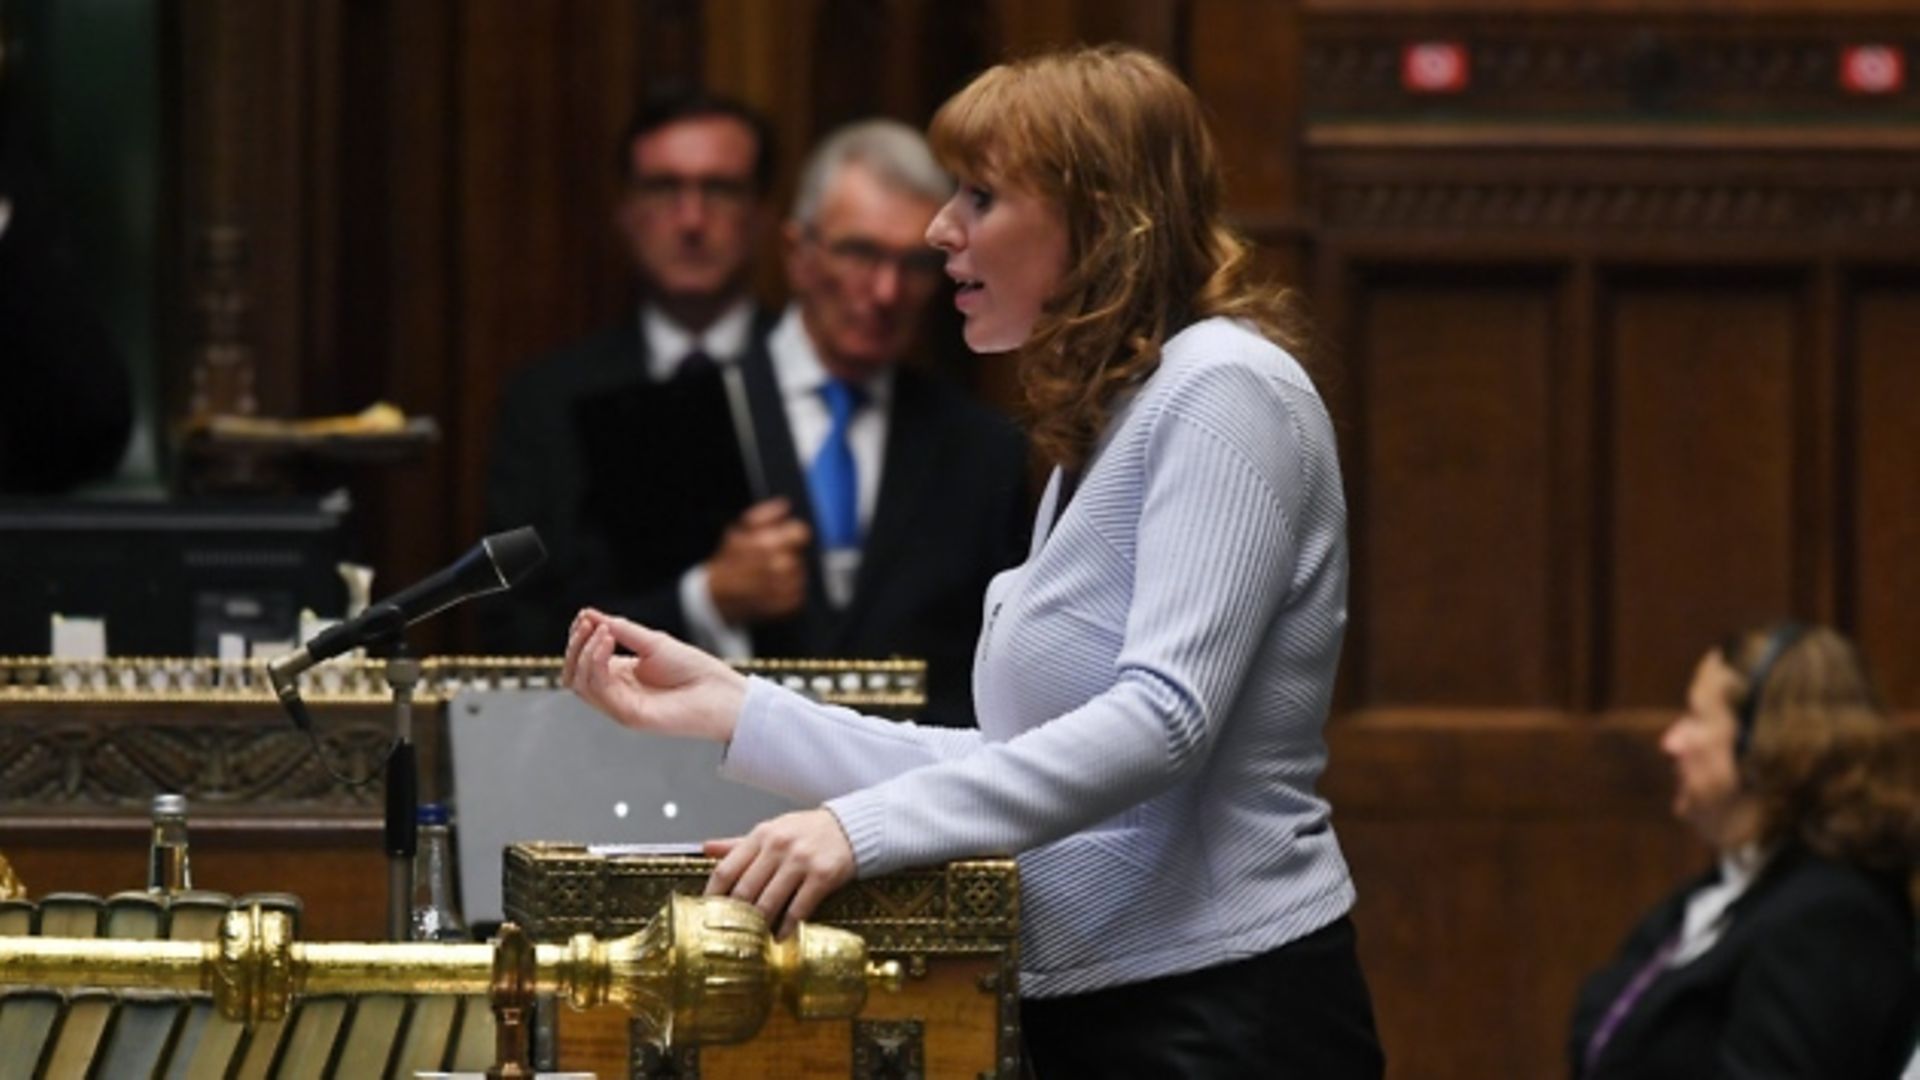 Deputy Labour leader Angela Rayner speaking at Prime Minister's Questions in the House of Commons. Photograph: Jessica Taylor/UK Parliament. - Credit: Jessica Taylor/UK Parliament